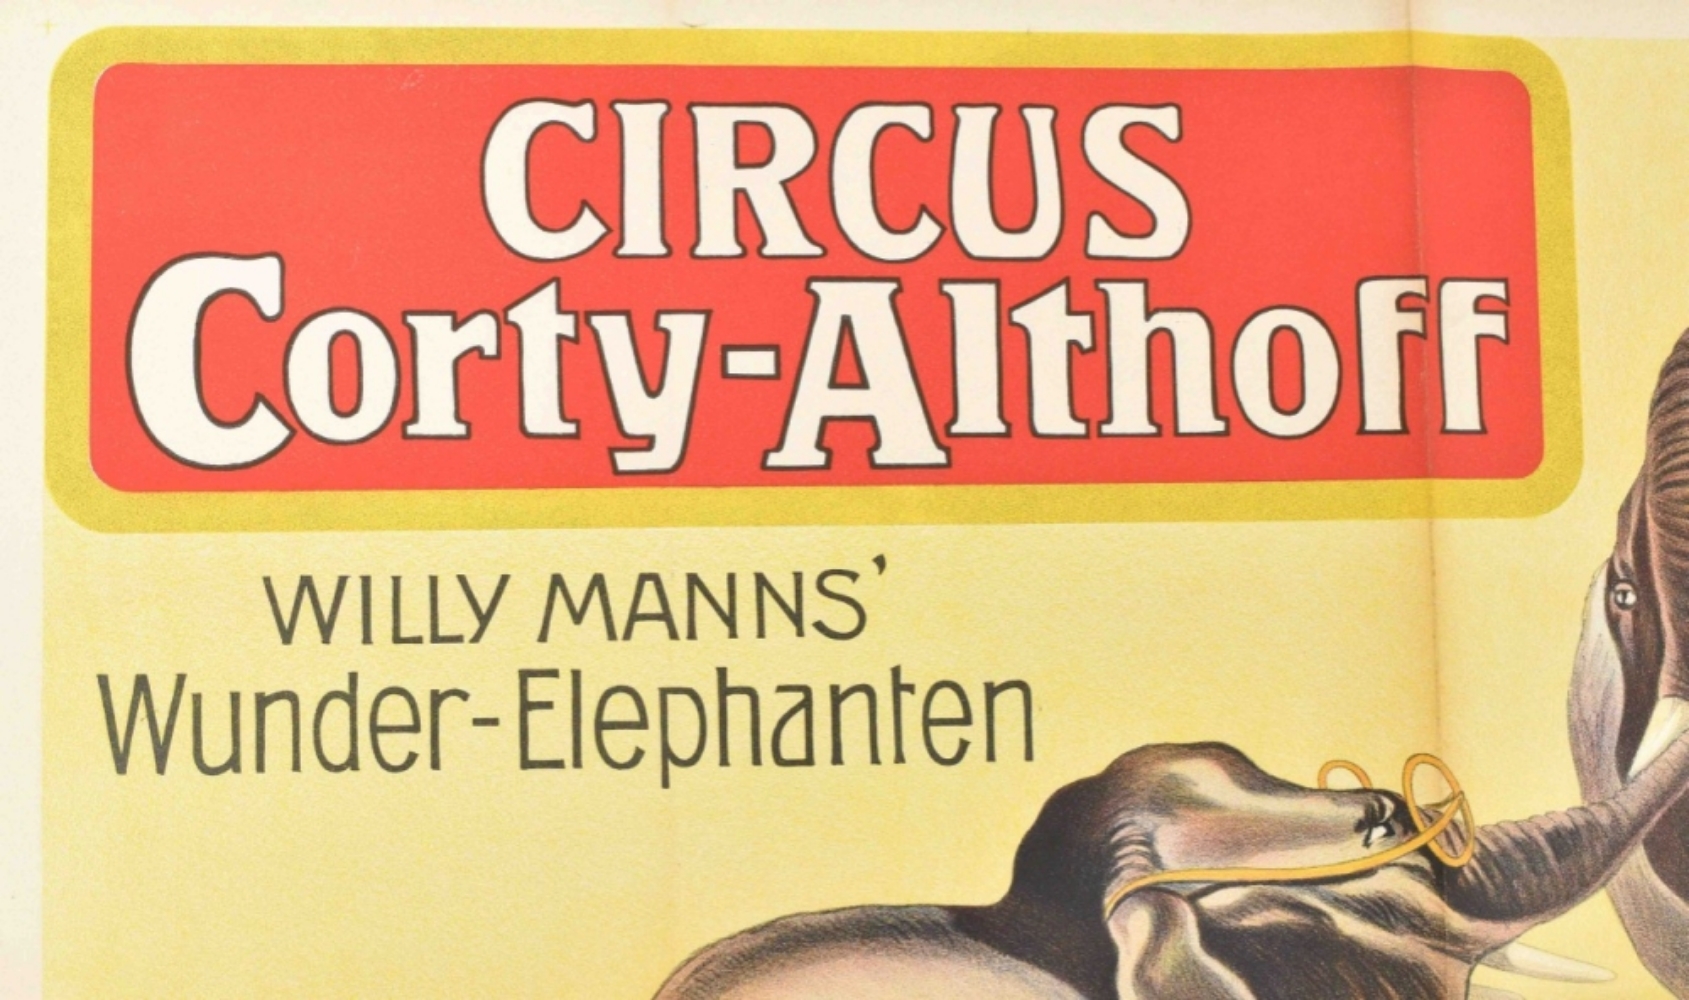 [Elephants. Corty-Althoff] Willy Manns' Wunder Elephanten - Image 6 of 7